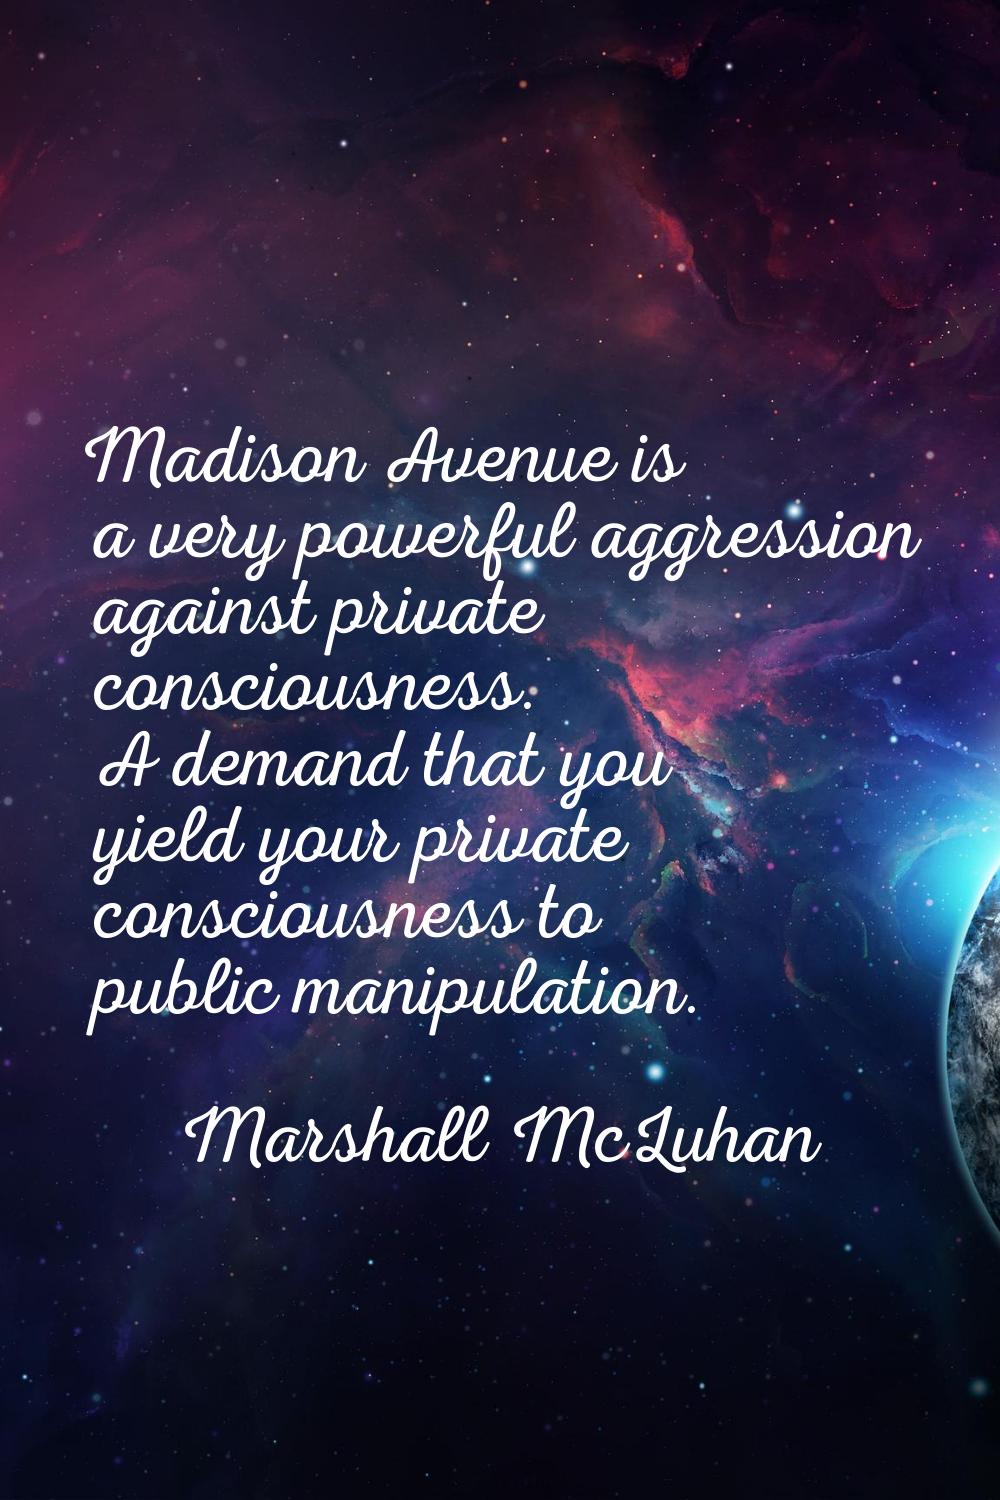 Madison Avenue is a very powerful aggression against private consciousness. A demand that you yield